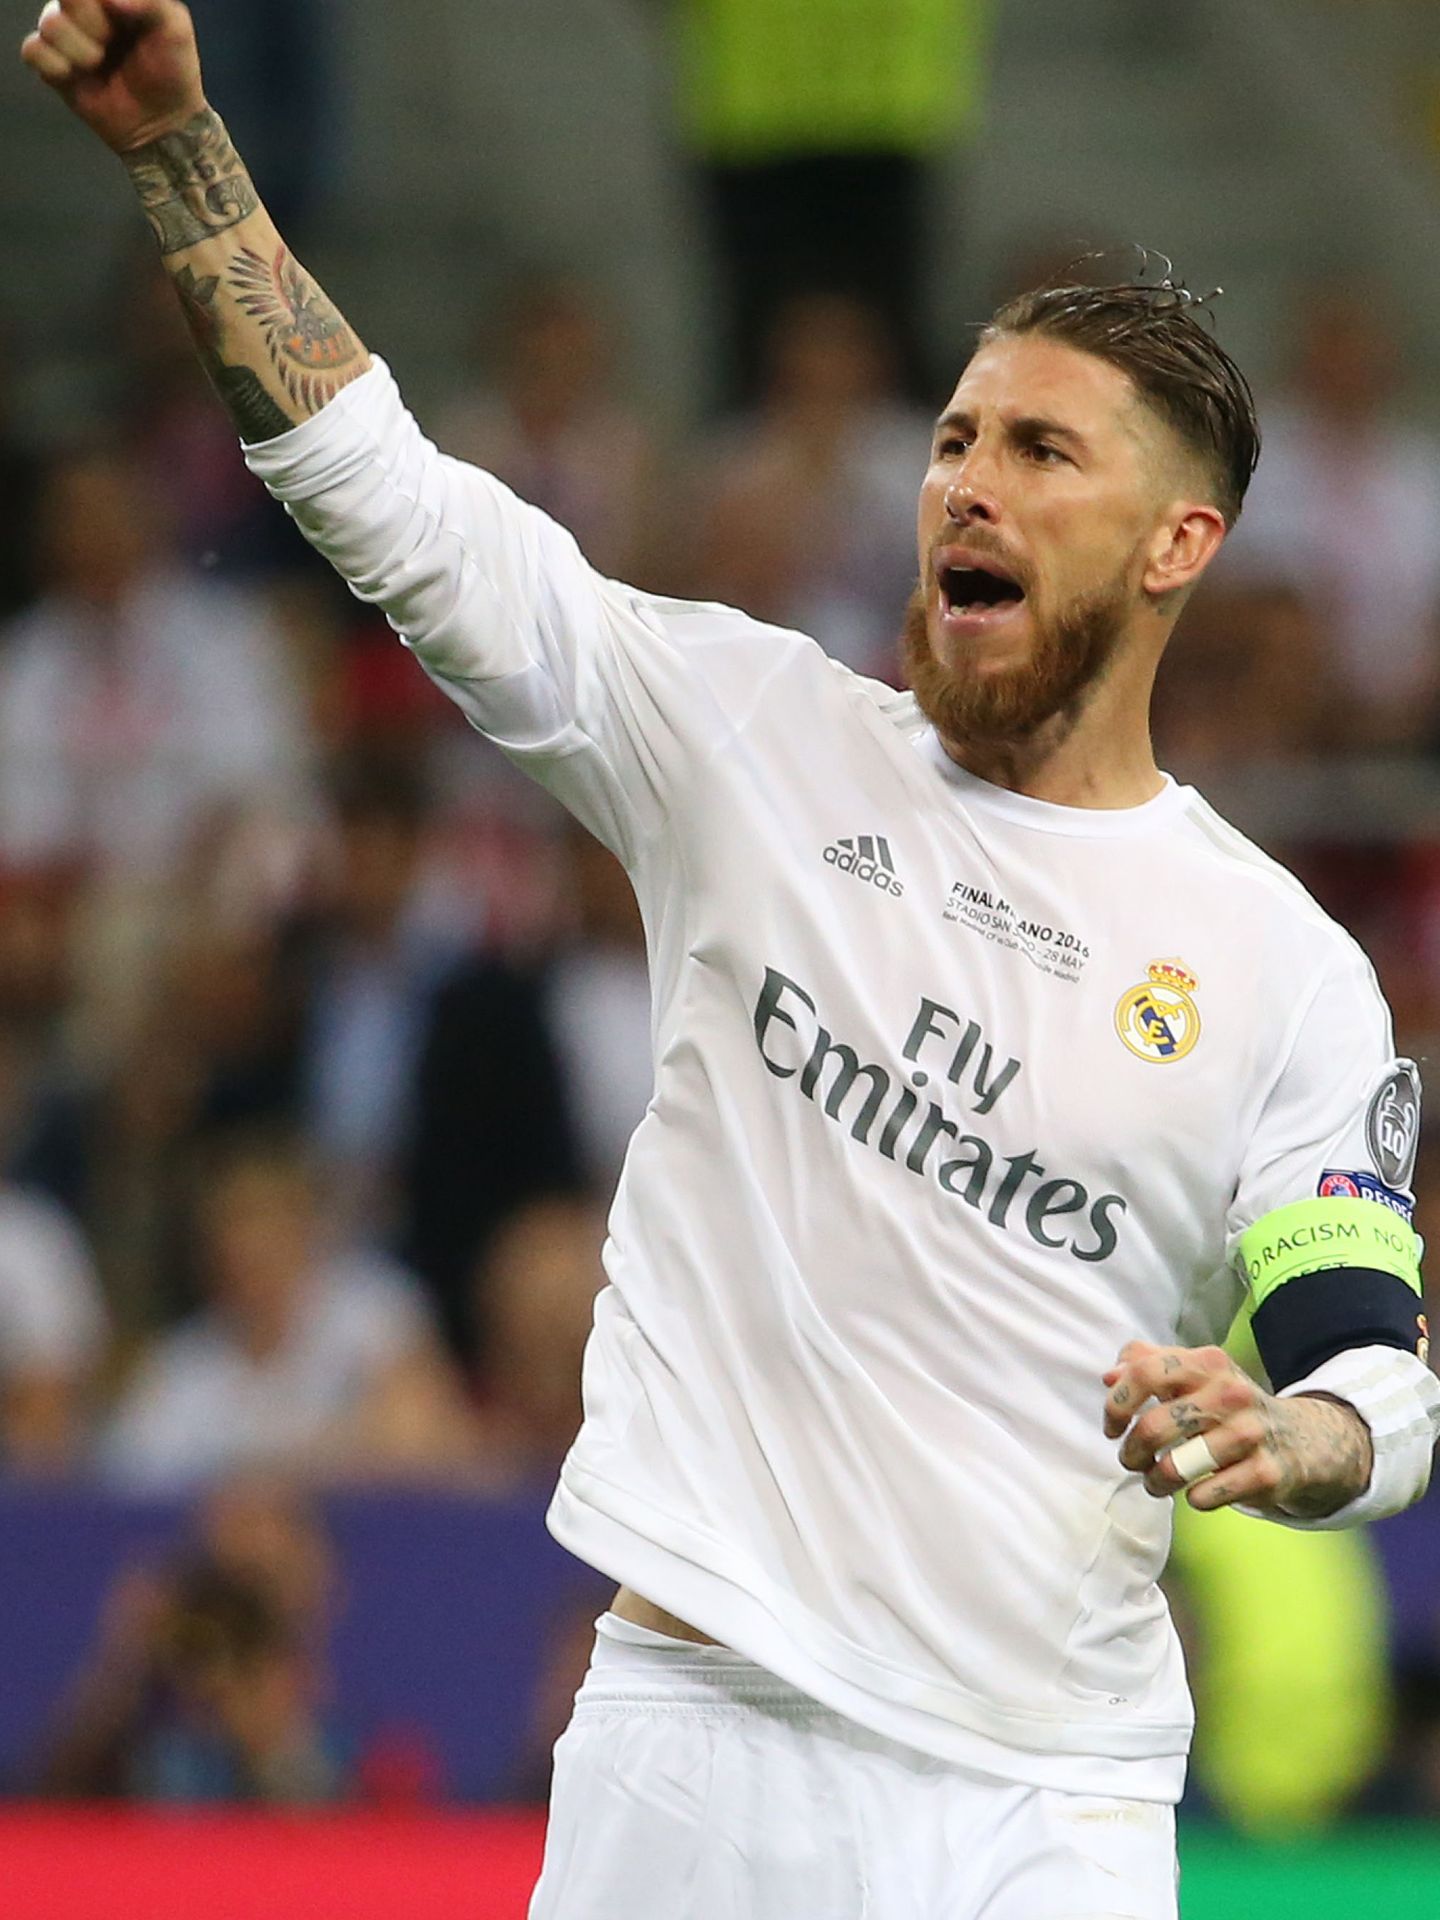 Soccer Football - Atletico Madrid v Real Madrid - UEFA Champions League Final - San Siro Stadium, Milan, Italy - 28 5 16 Real Madrid's Sergio Ramos celebrates scoring during the penalty shootout Reuters   Stefano Rellandini Livepic EDITORIAL USE ONLY.